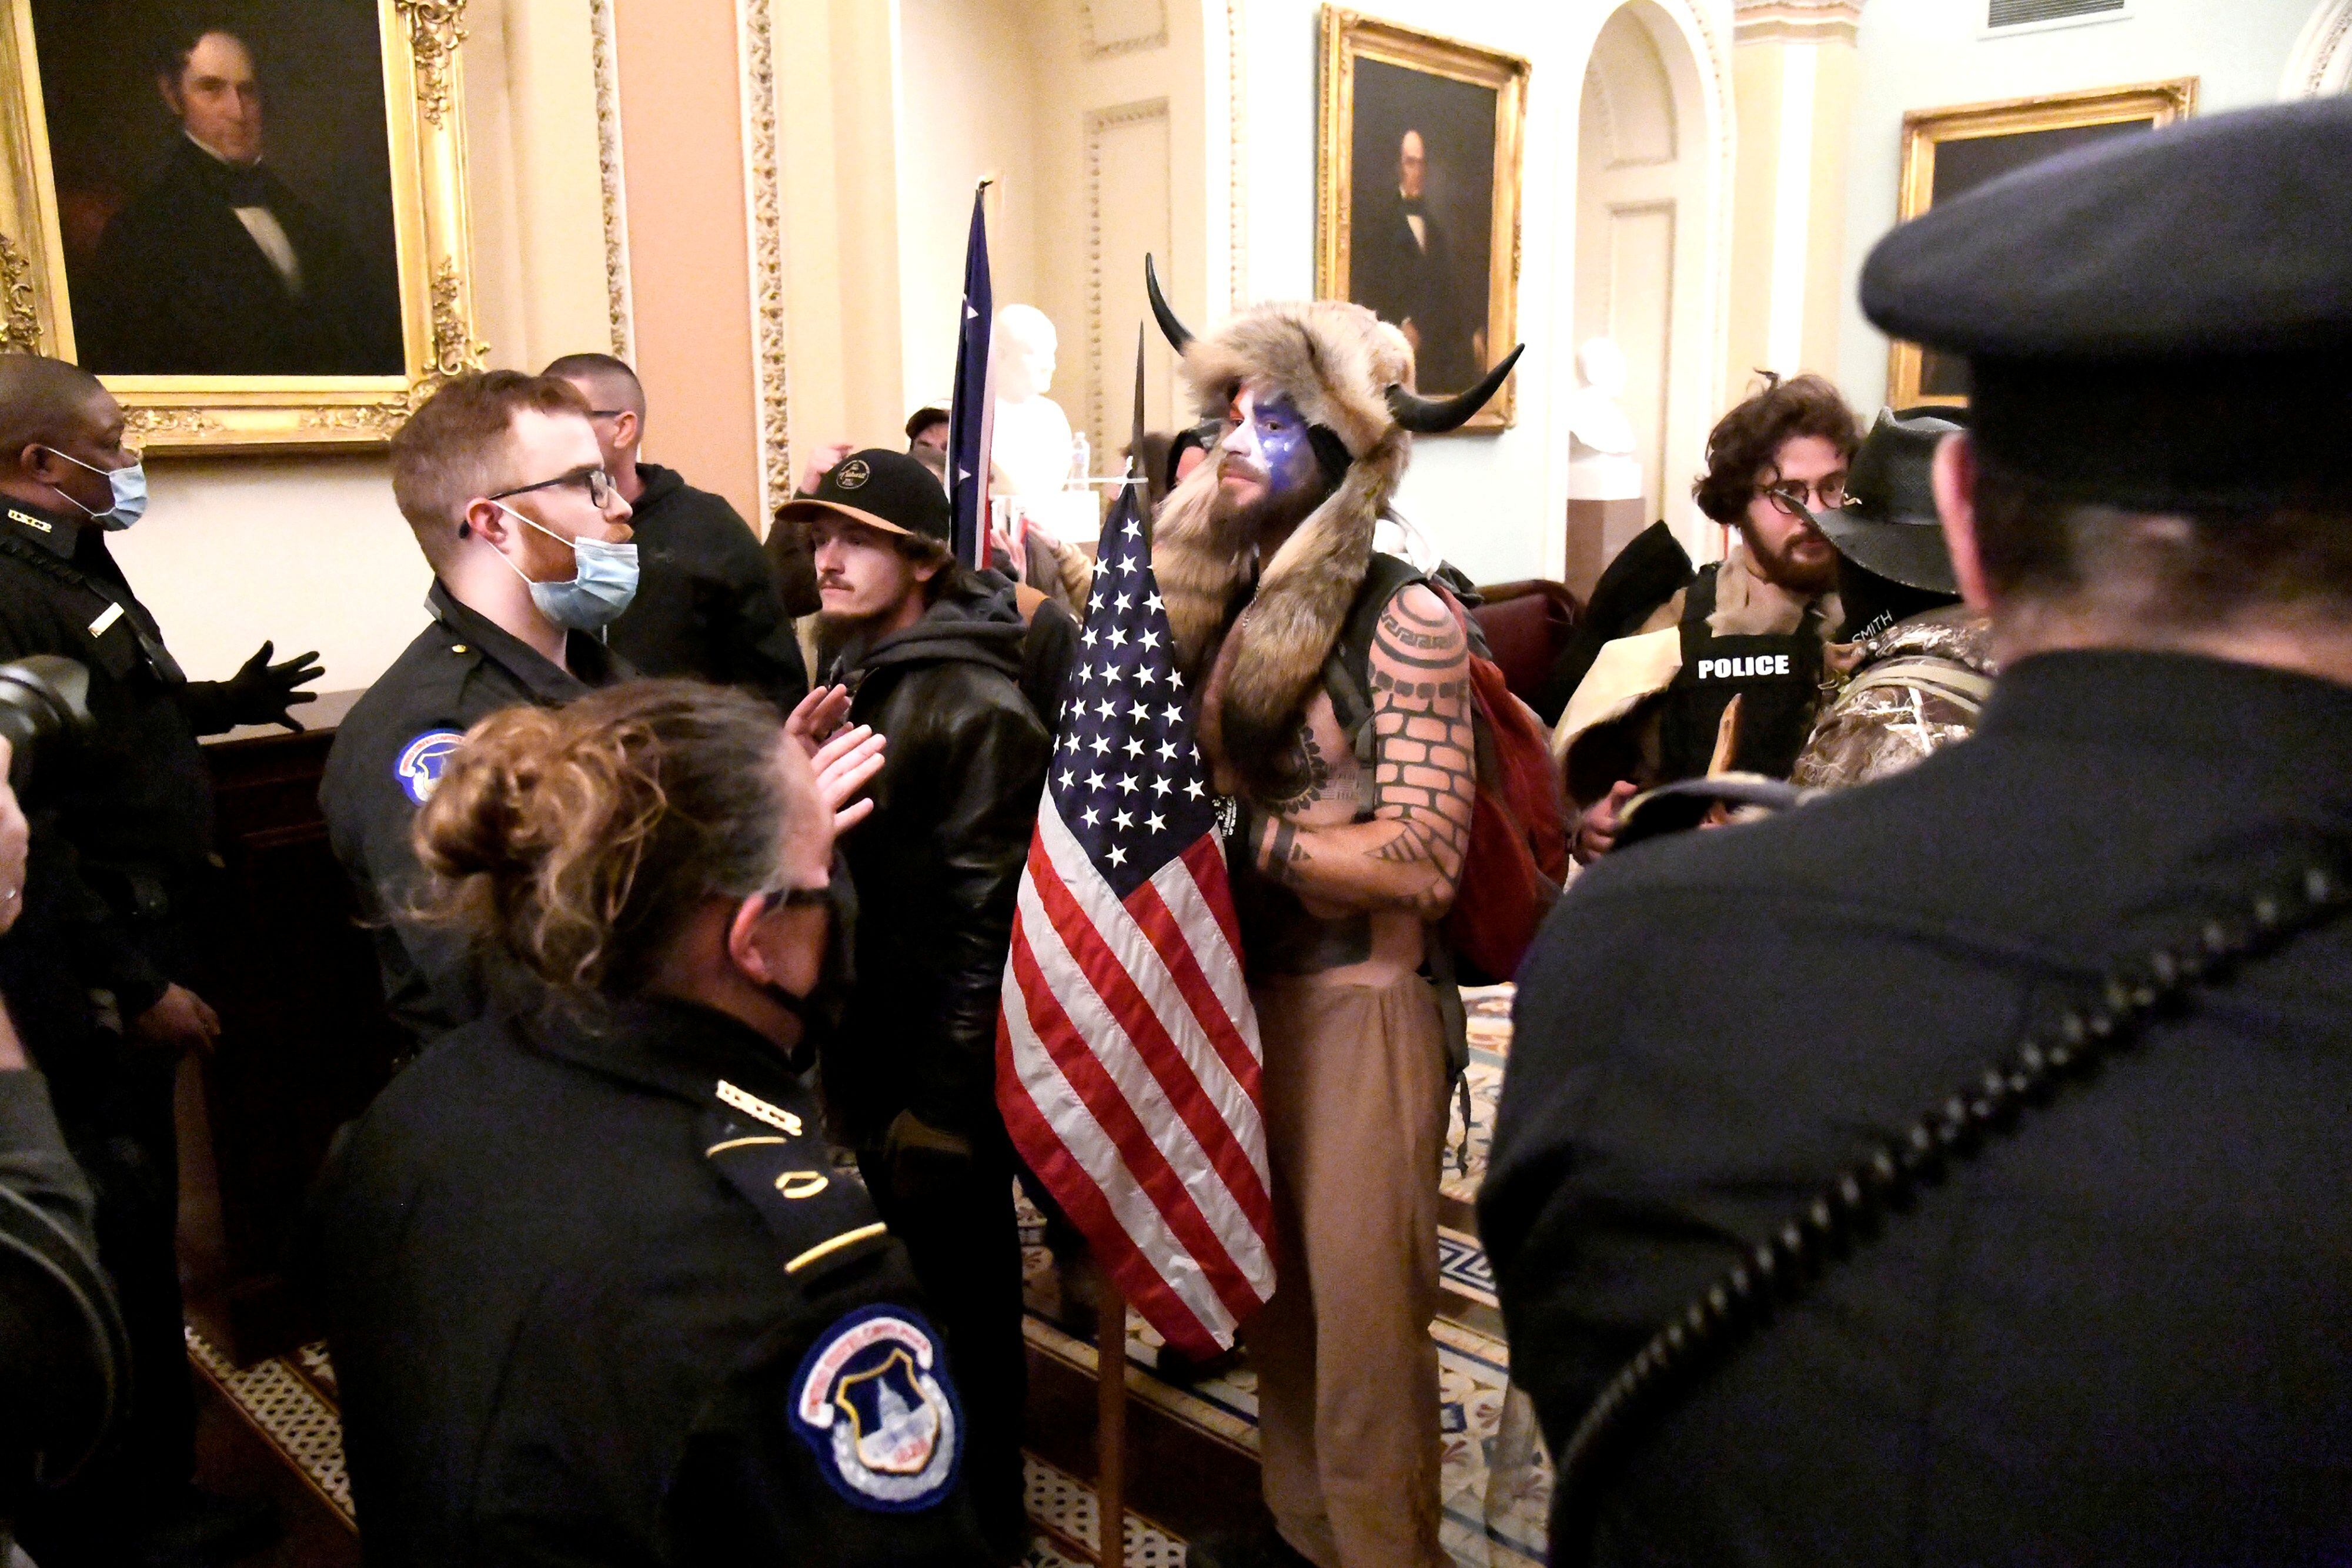 File photo: Police confront supporters of President Donald Trump on the second floor of the United States Capitol, near the entrance to the Senate, on January 6, 2021 (REUTERS / Mike Theiler)